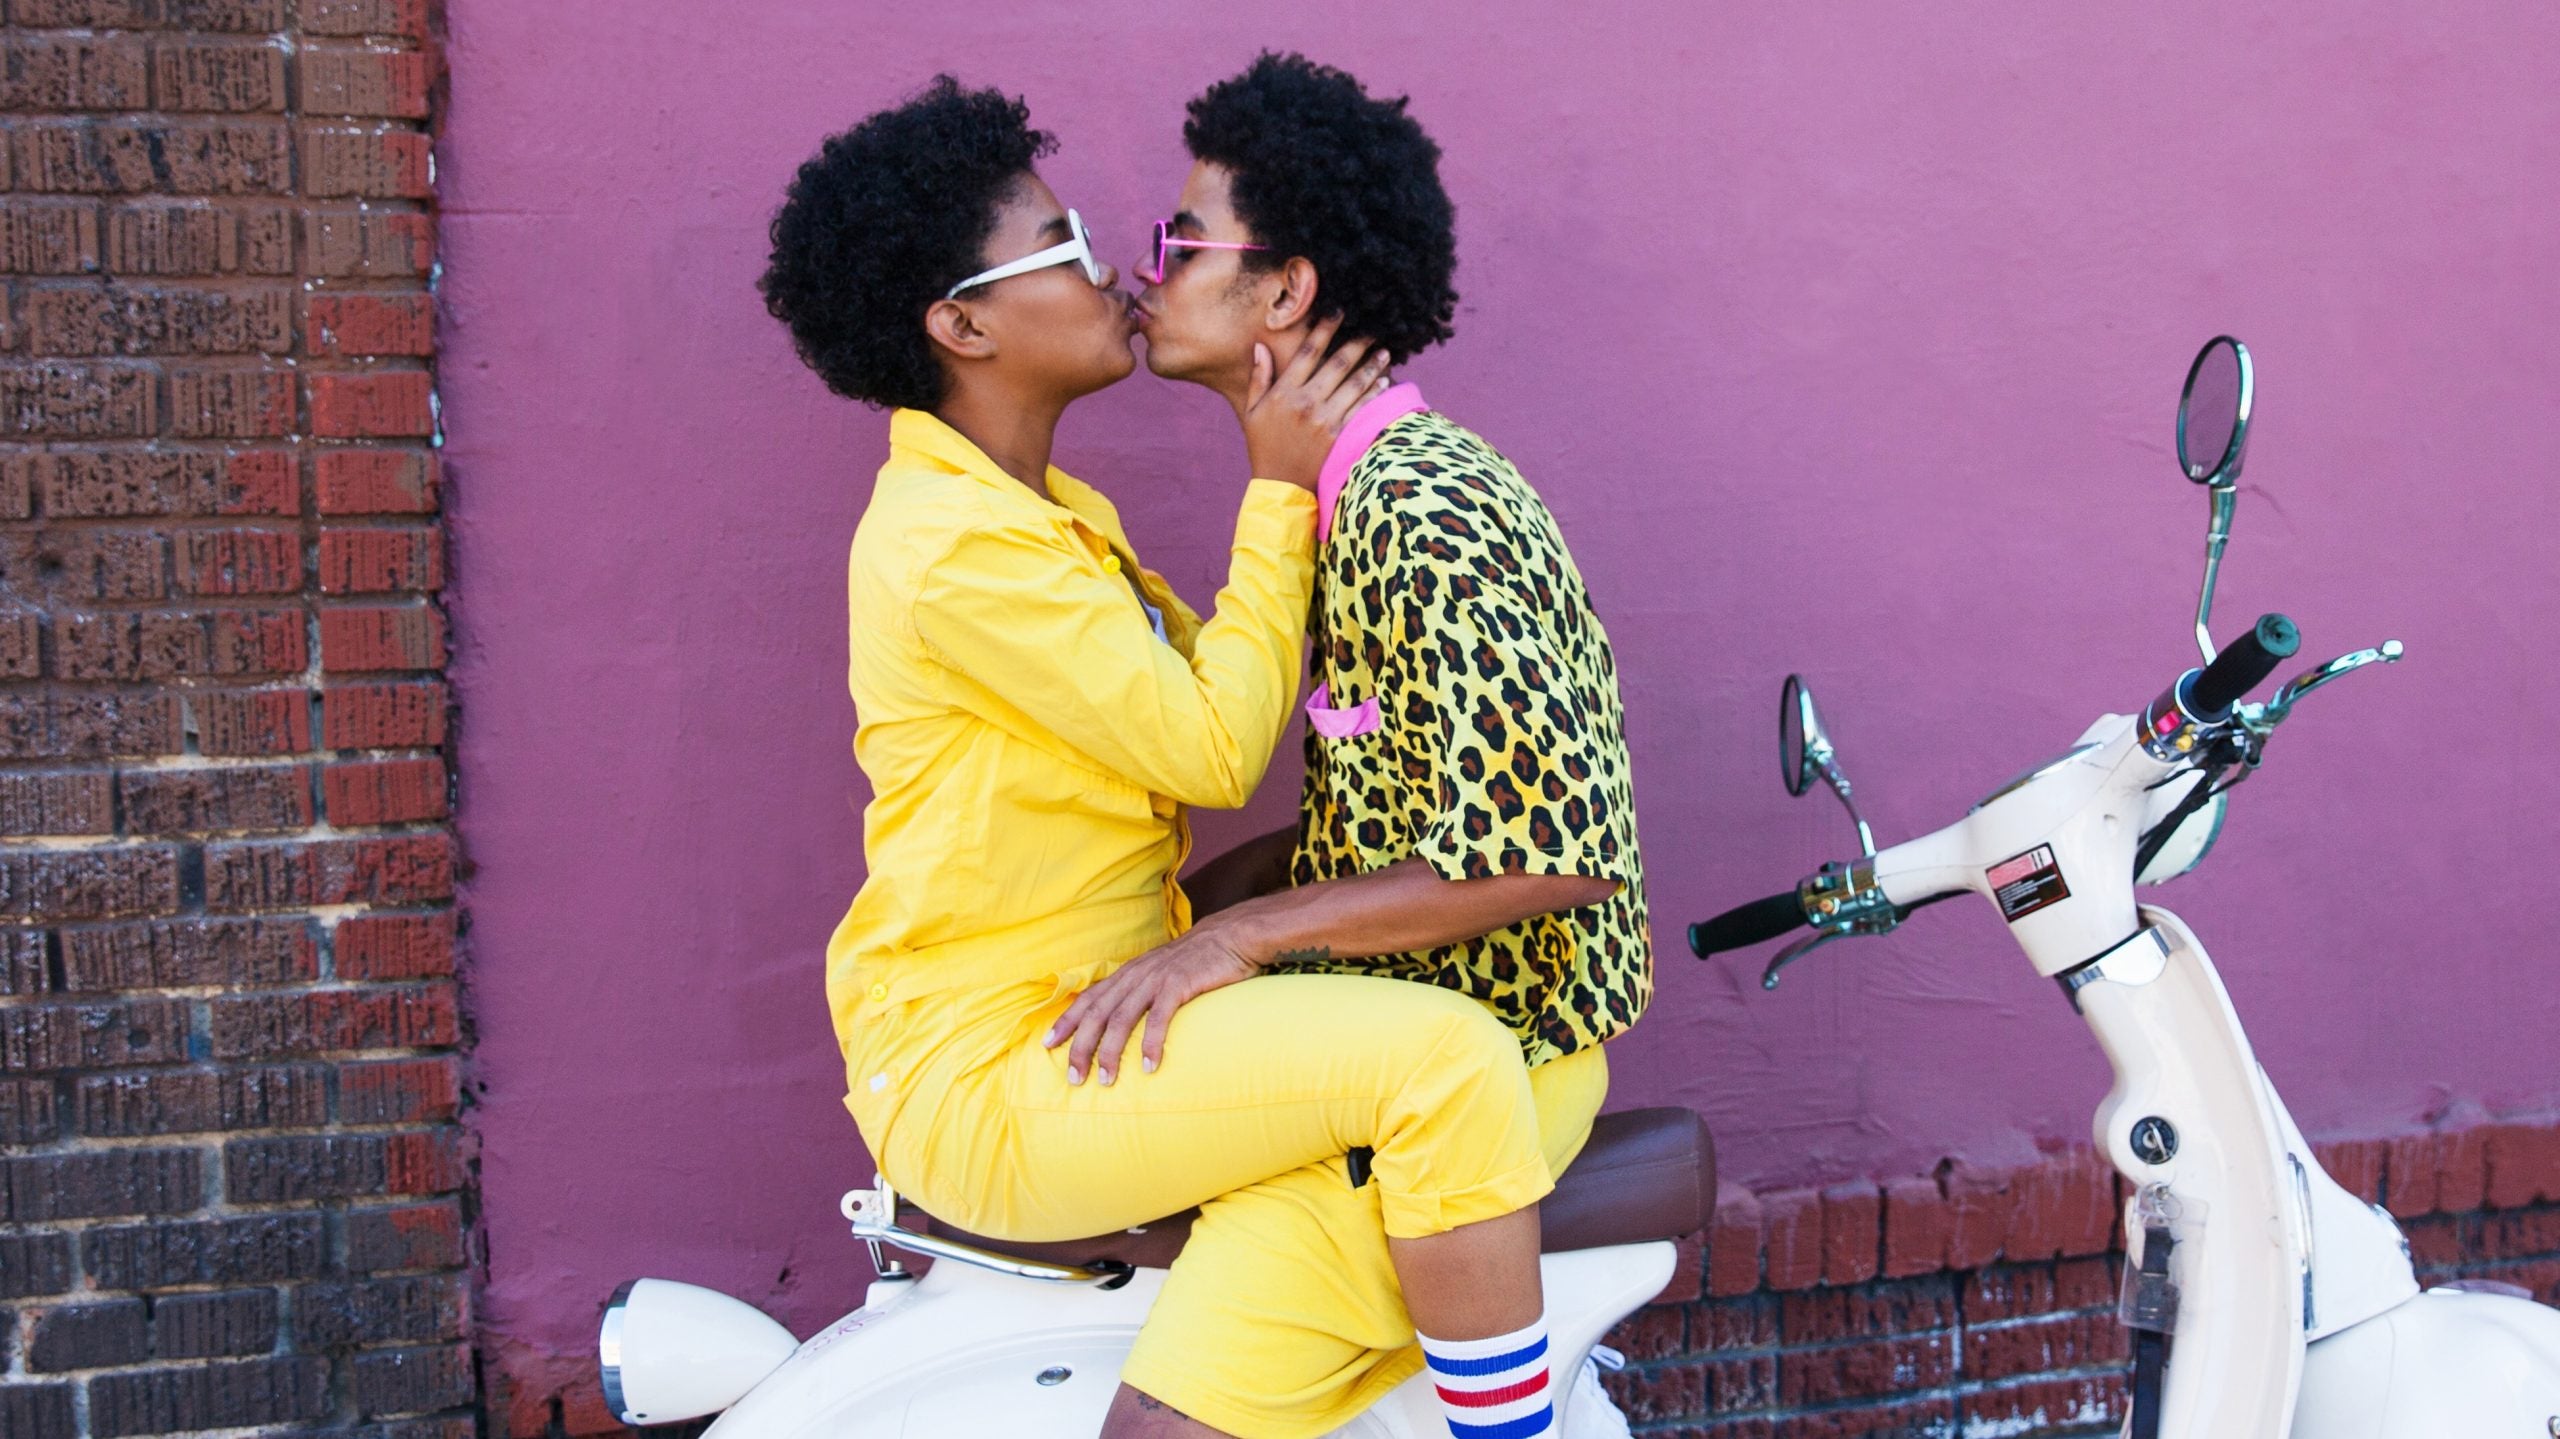 5 Relationship Goals Every Couple Should Have In 2023